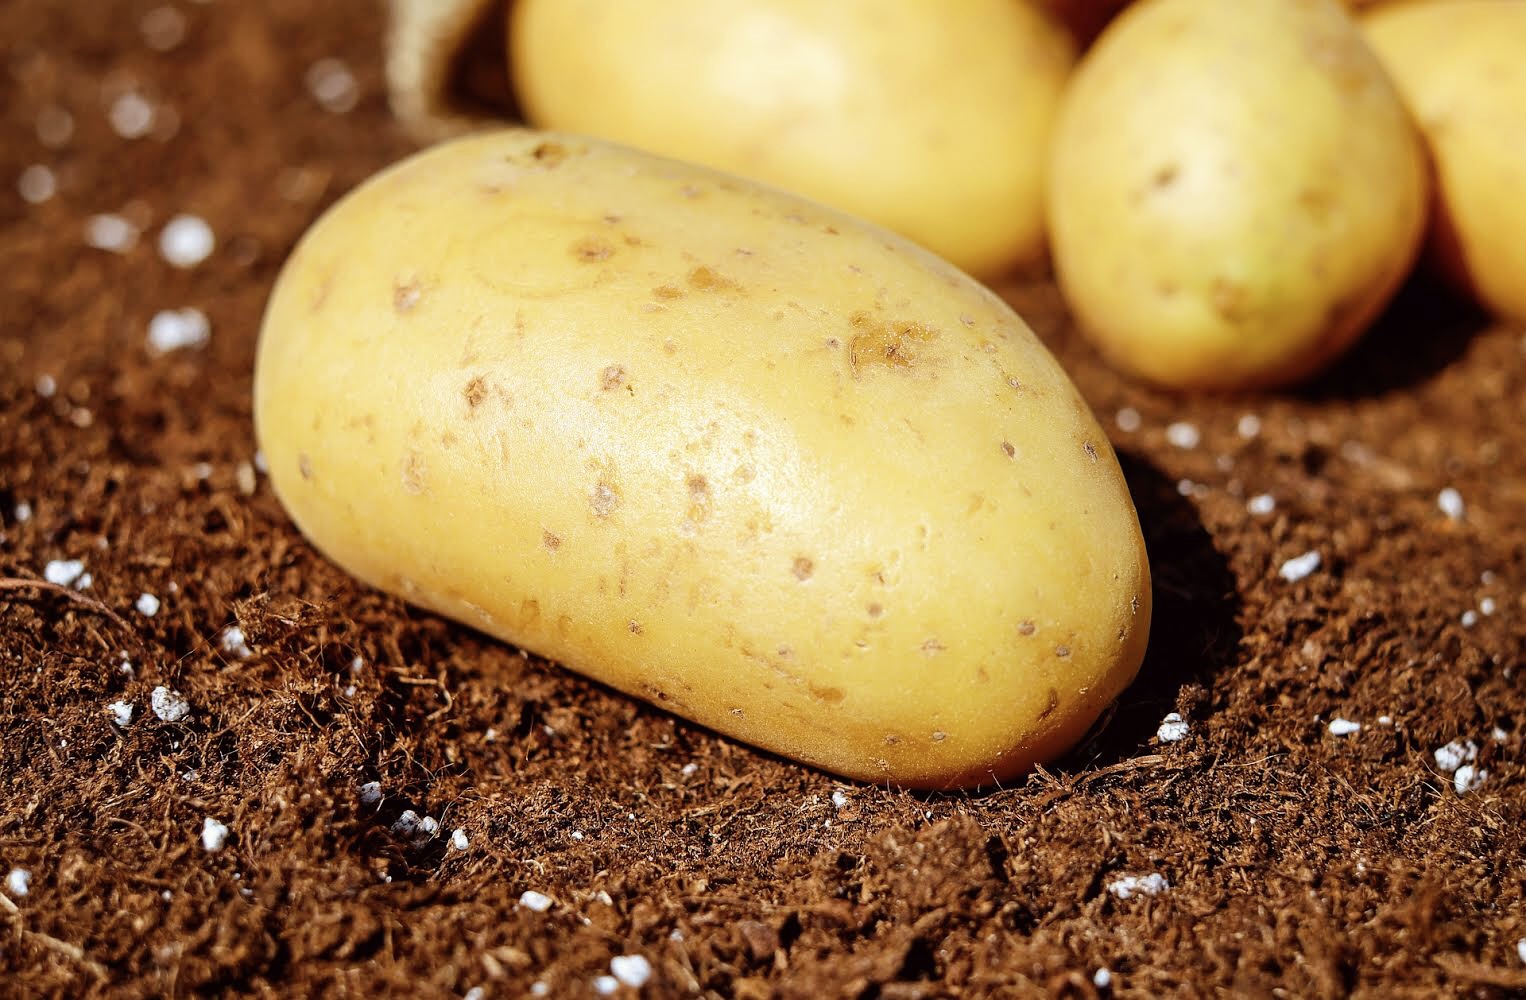 The underground vegetable garden: discovering tubers